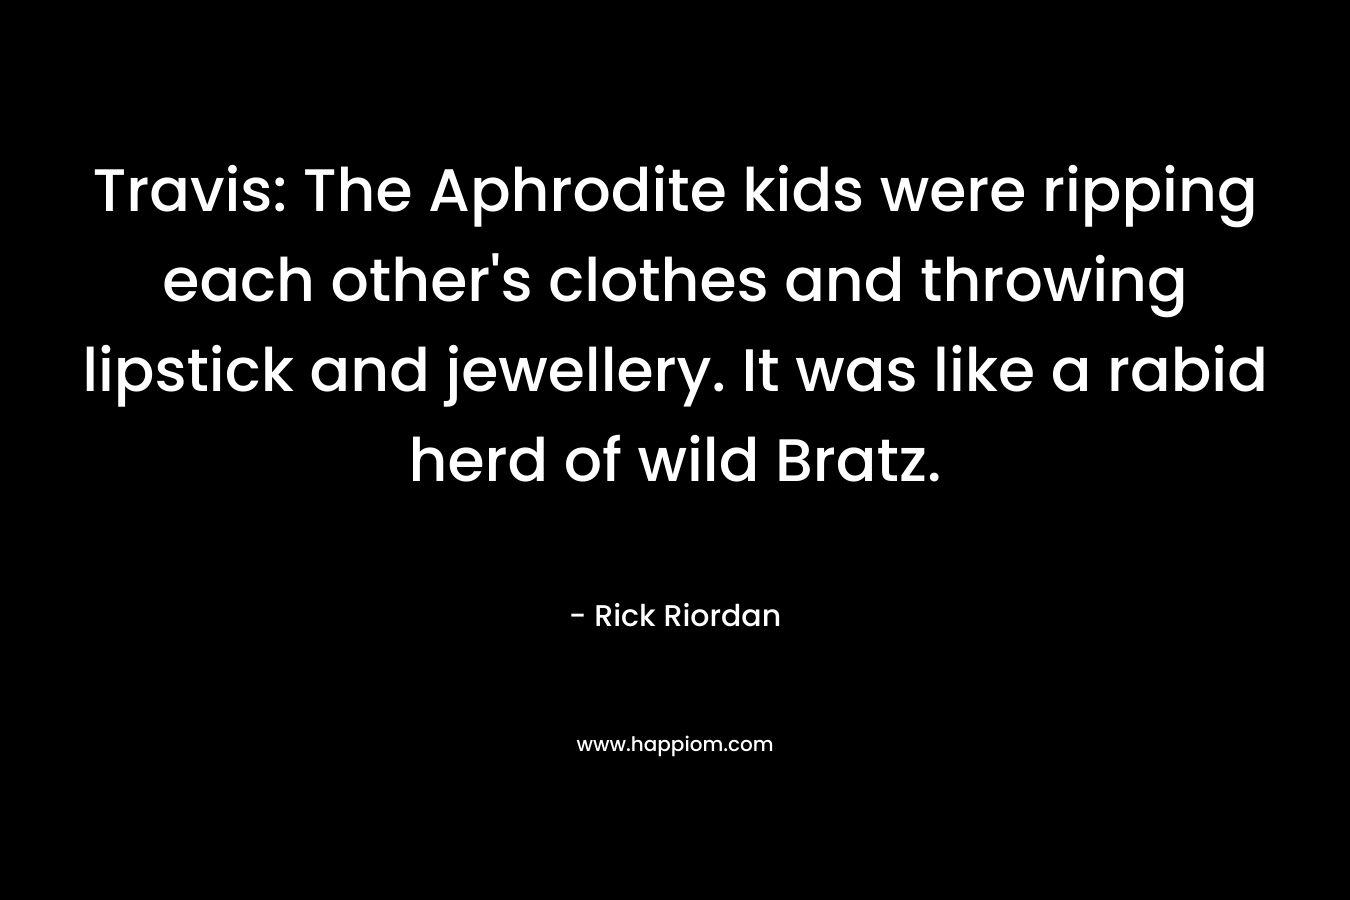 Travis: The Aphrodite kids were ripping each other’s clothes and throwing lipstick and jewellery. It was like a rabid herd of wild Bratz. – Rick Riordan